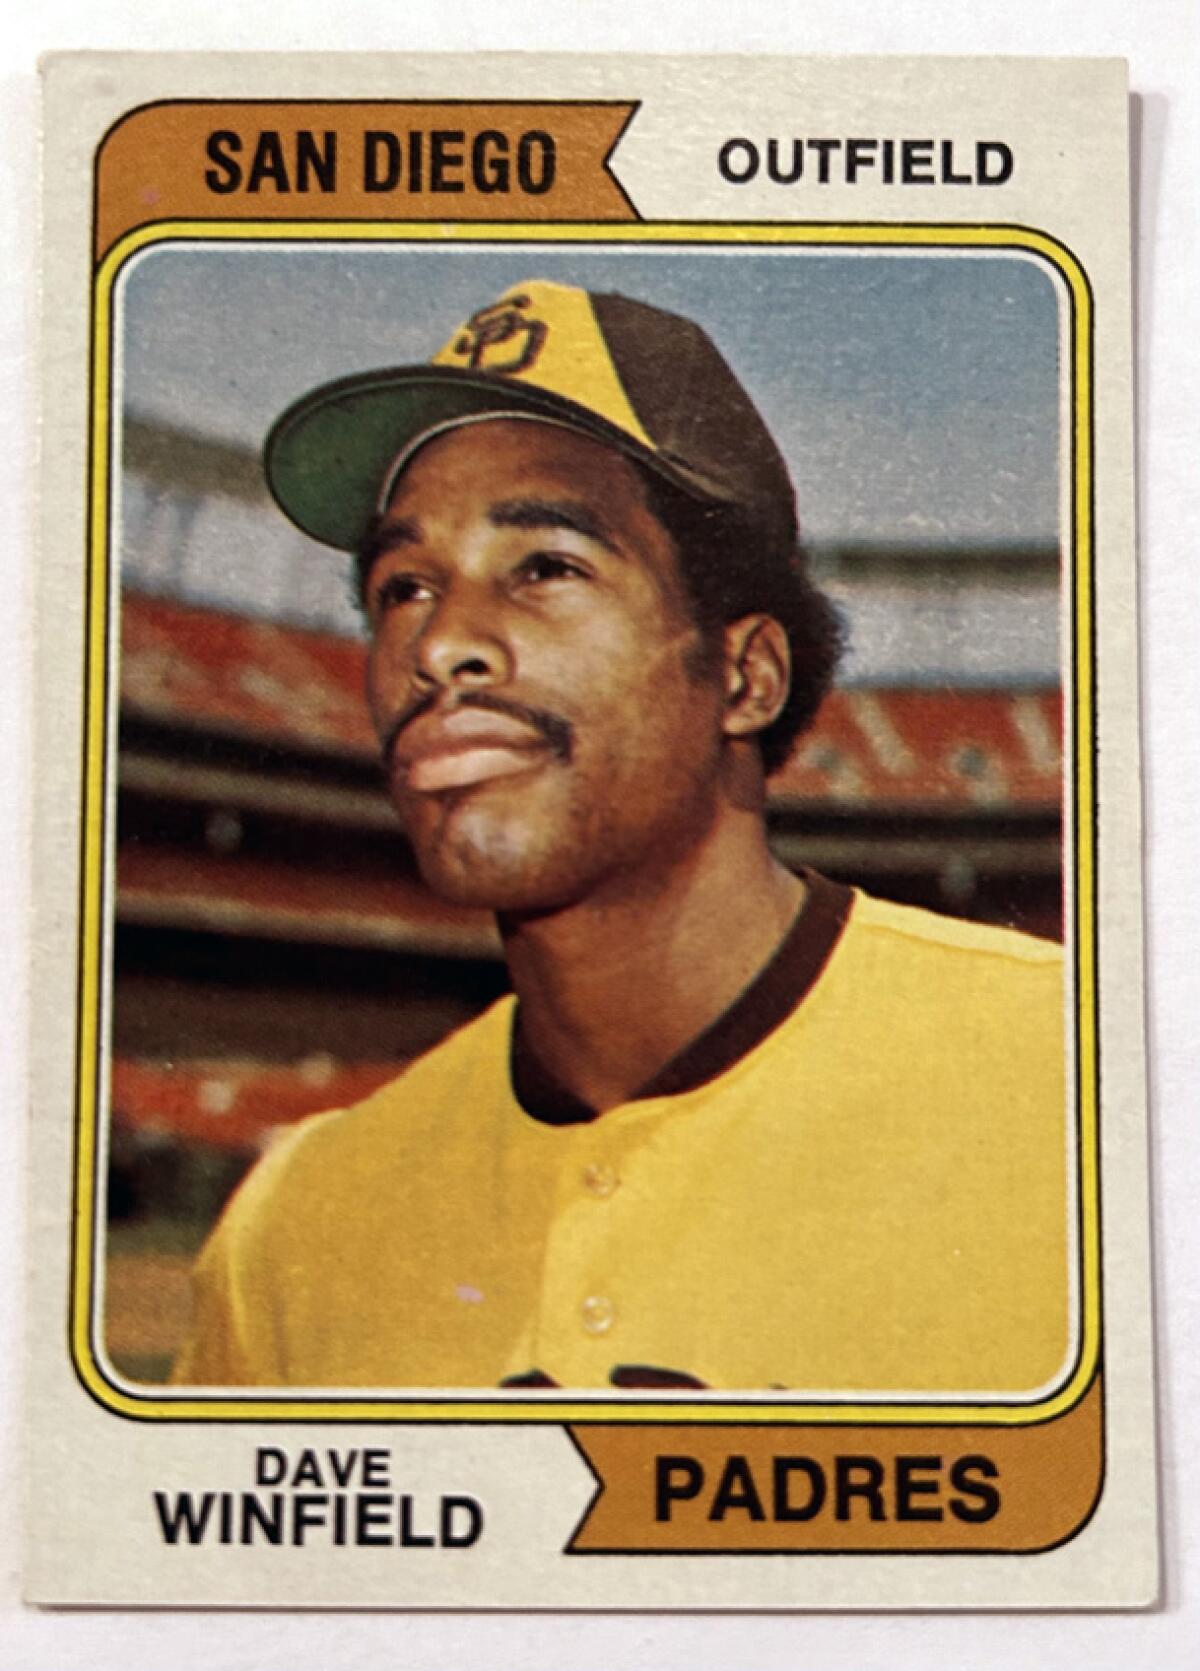 50th anniversay: Dave Winfield's MLB debut for Padres - The San